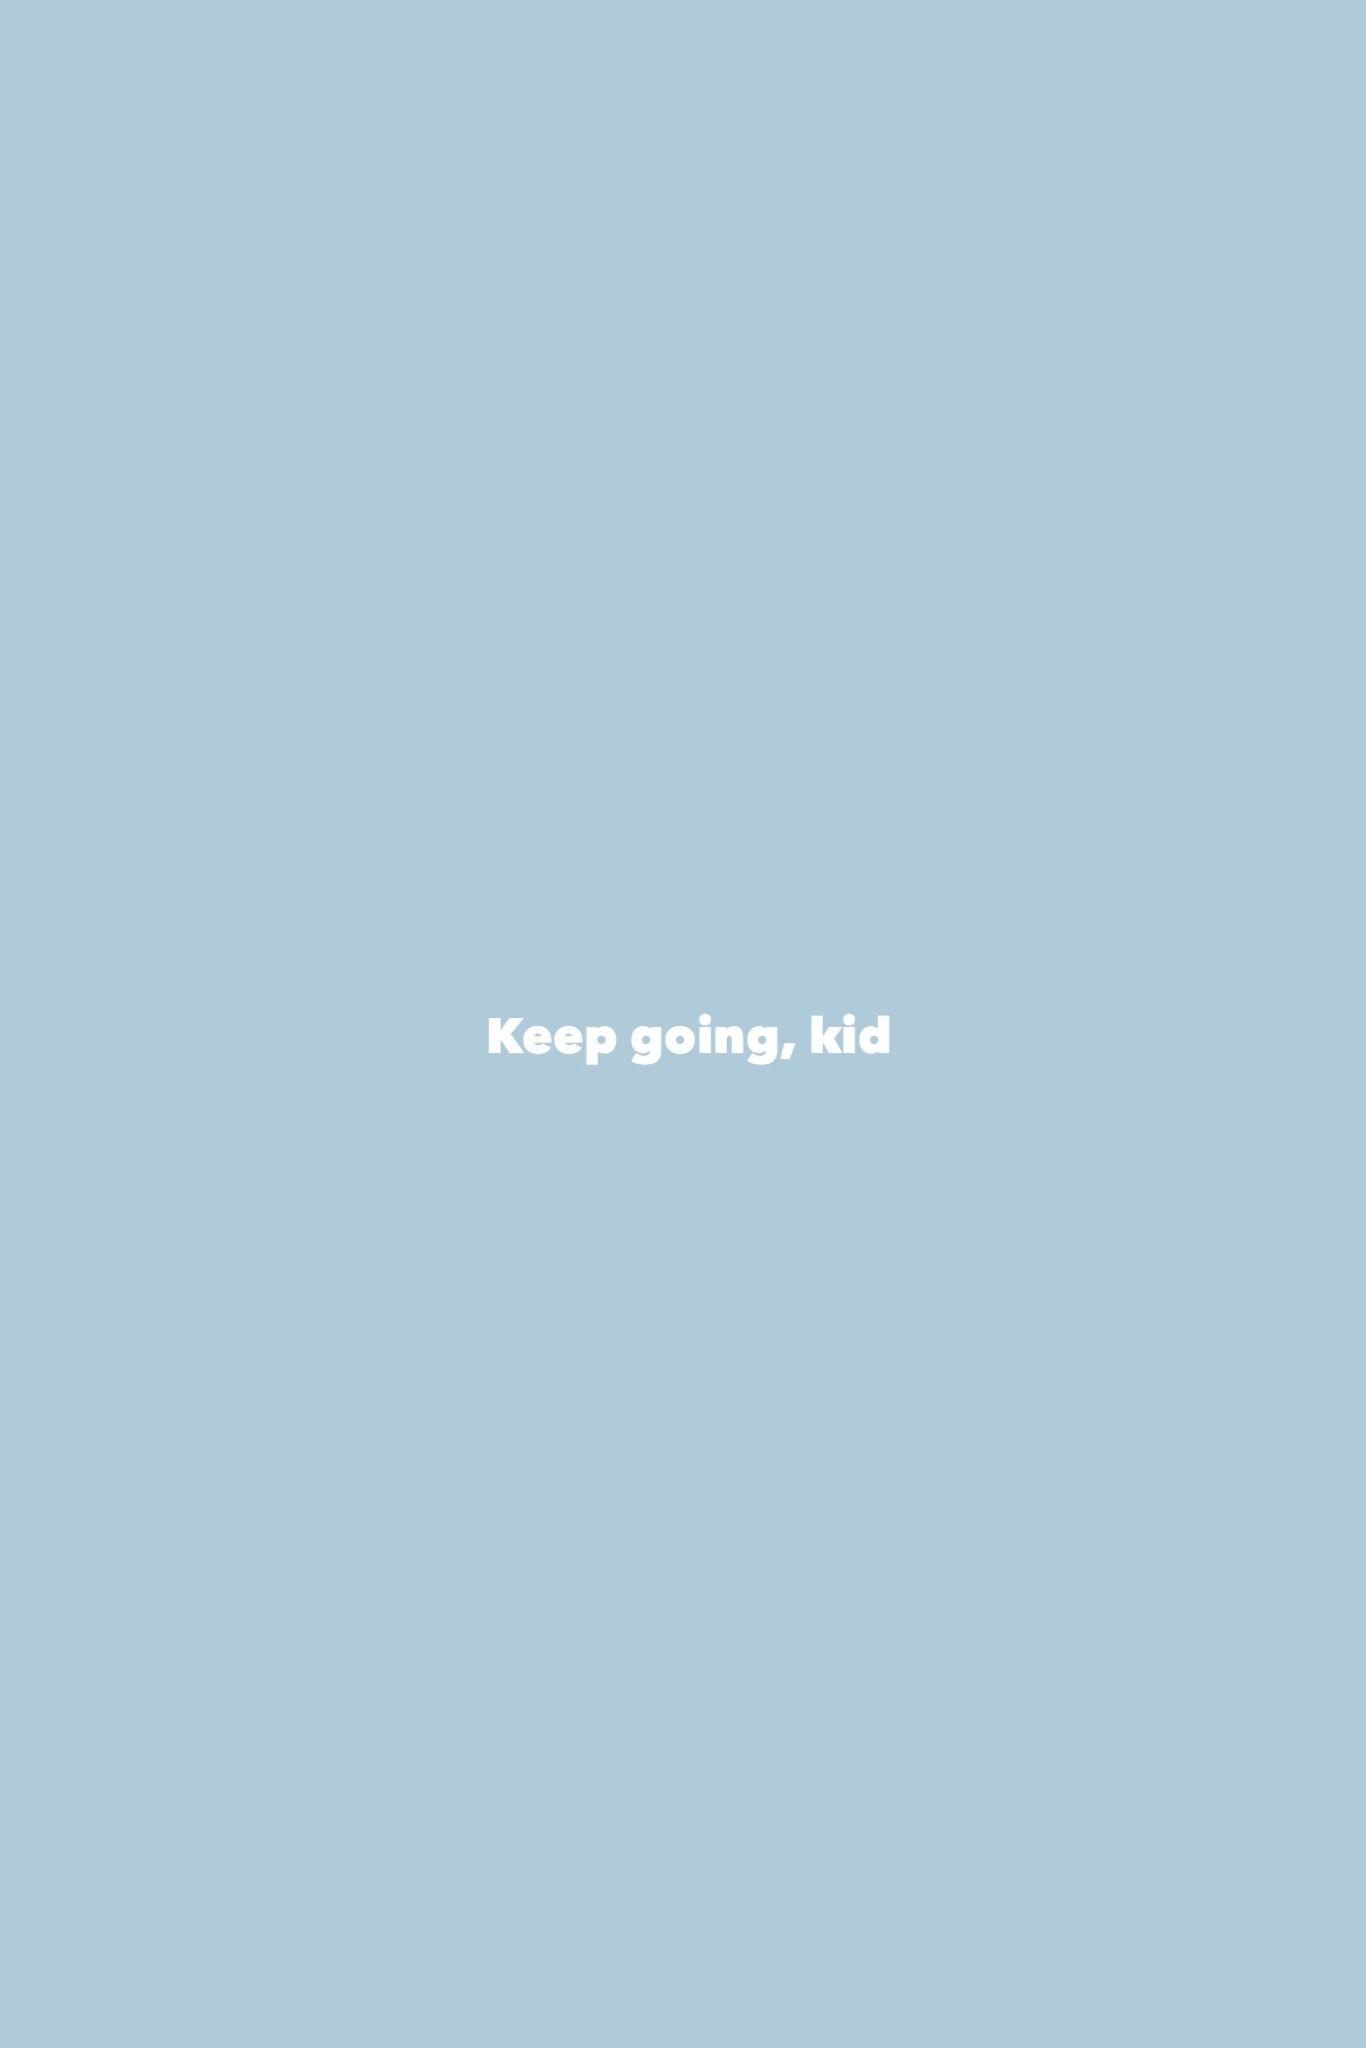 VSCO Blue Wallpaper. to5animations.com Wallpaper, Gifs, Background, Image